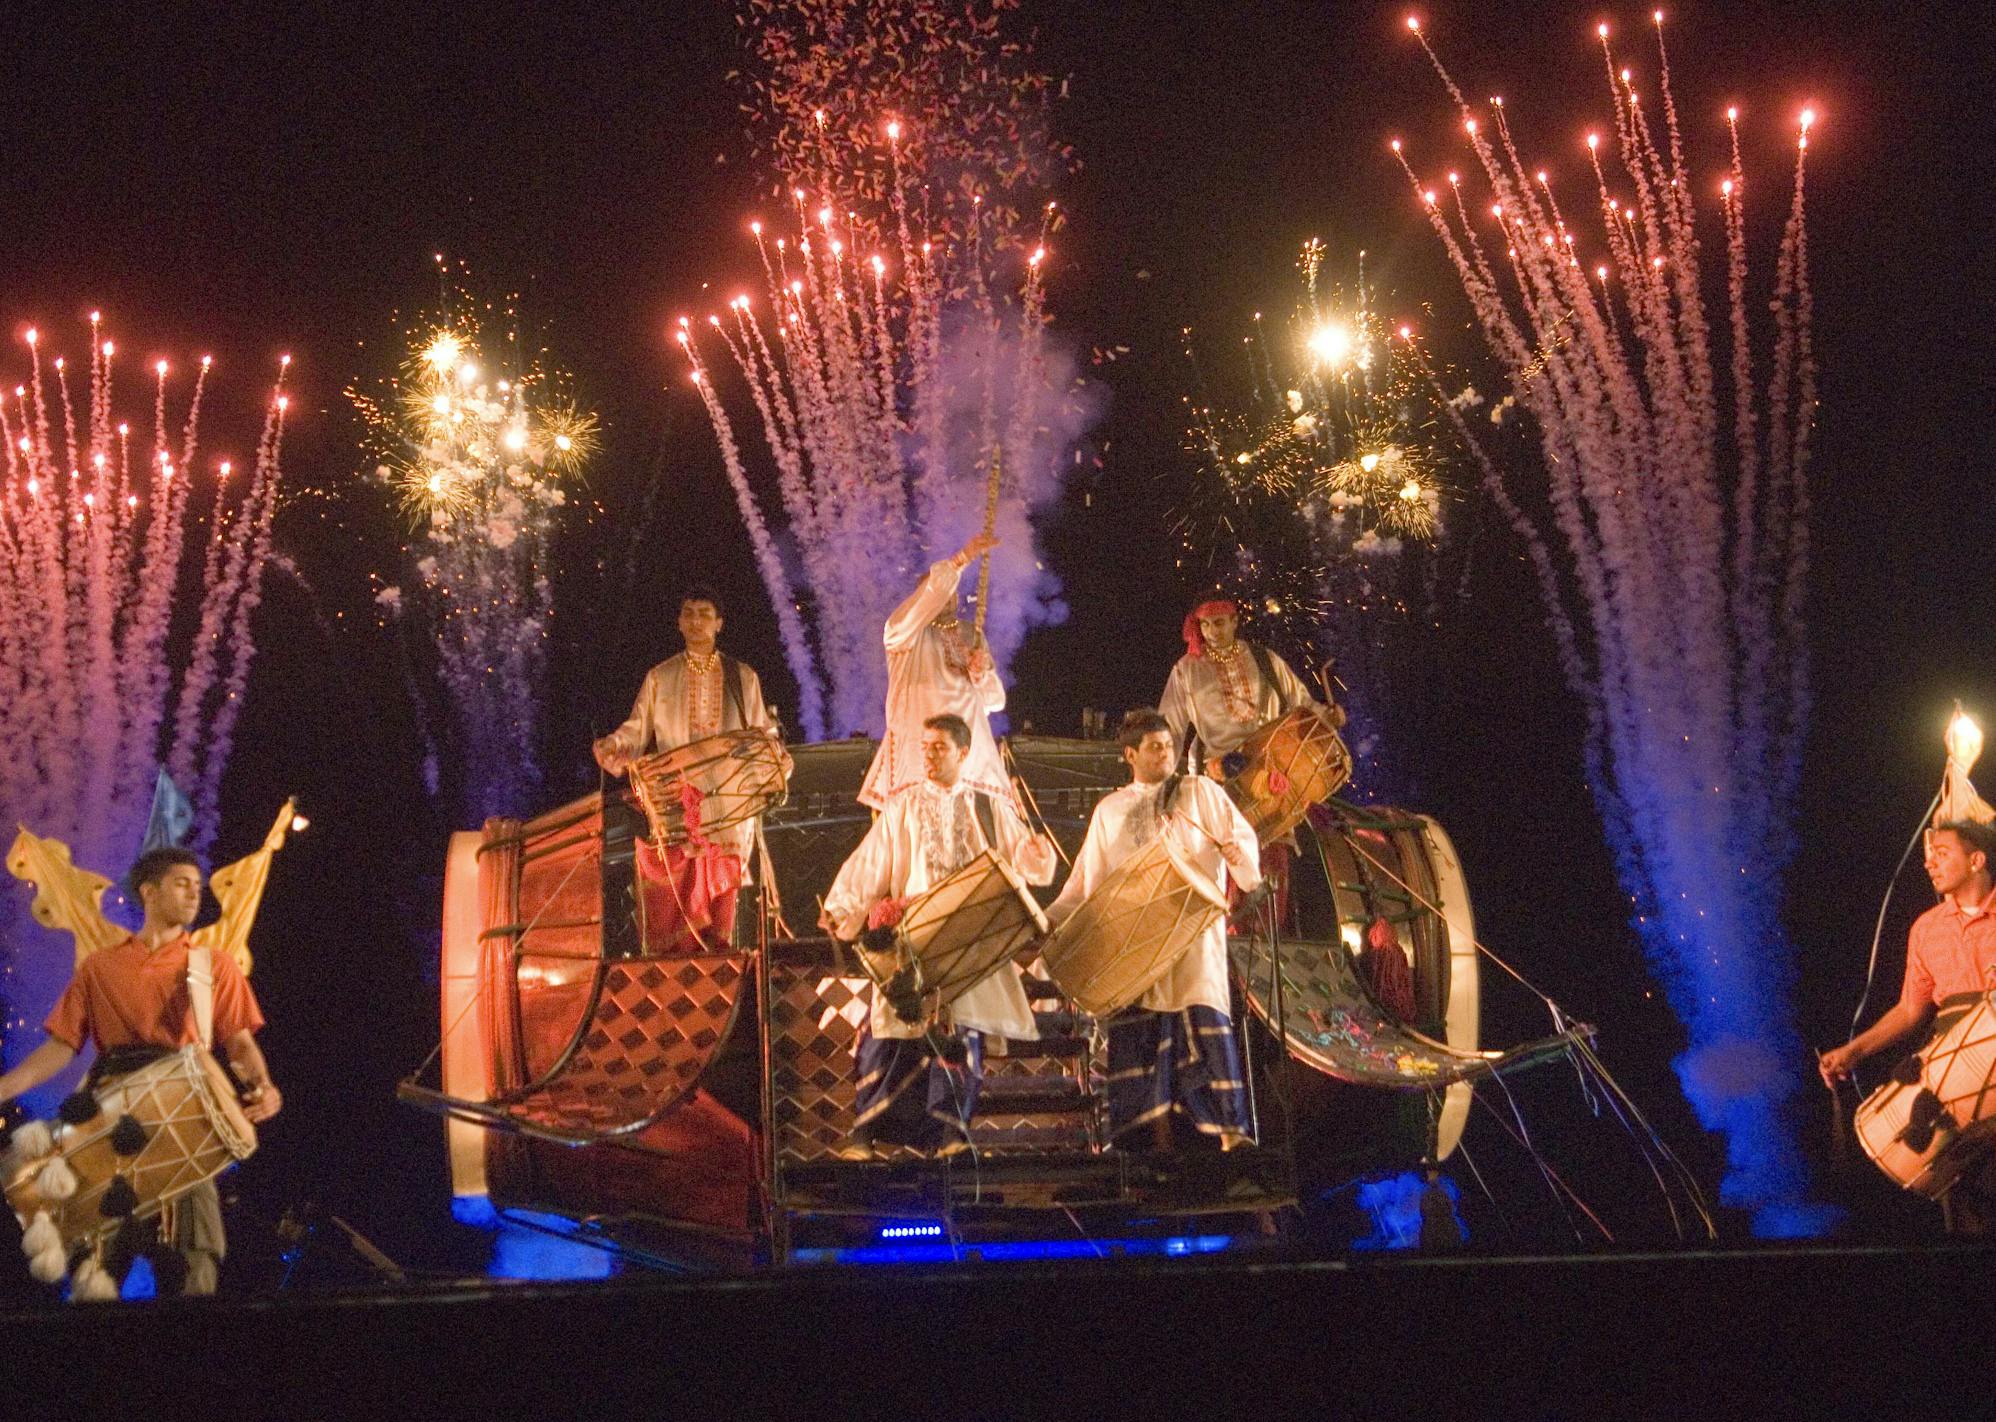 Drummers inside a giant Dhol drum with fireworks going off behind them